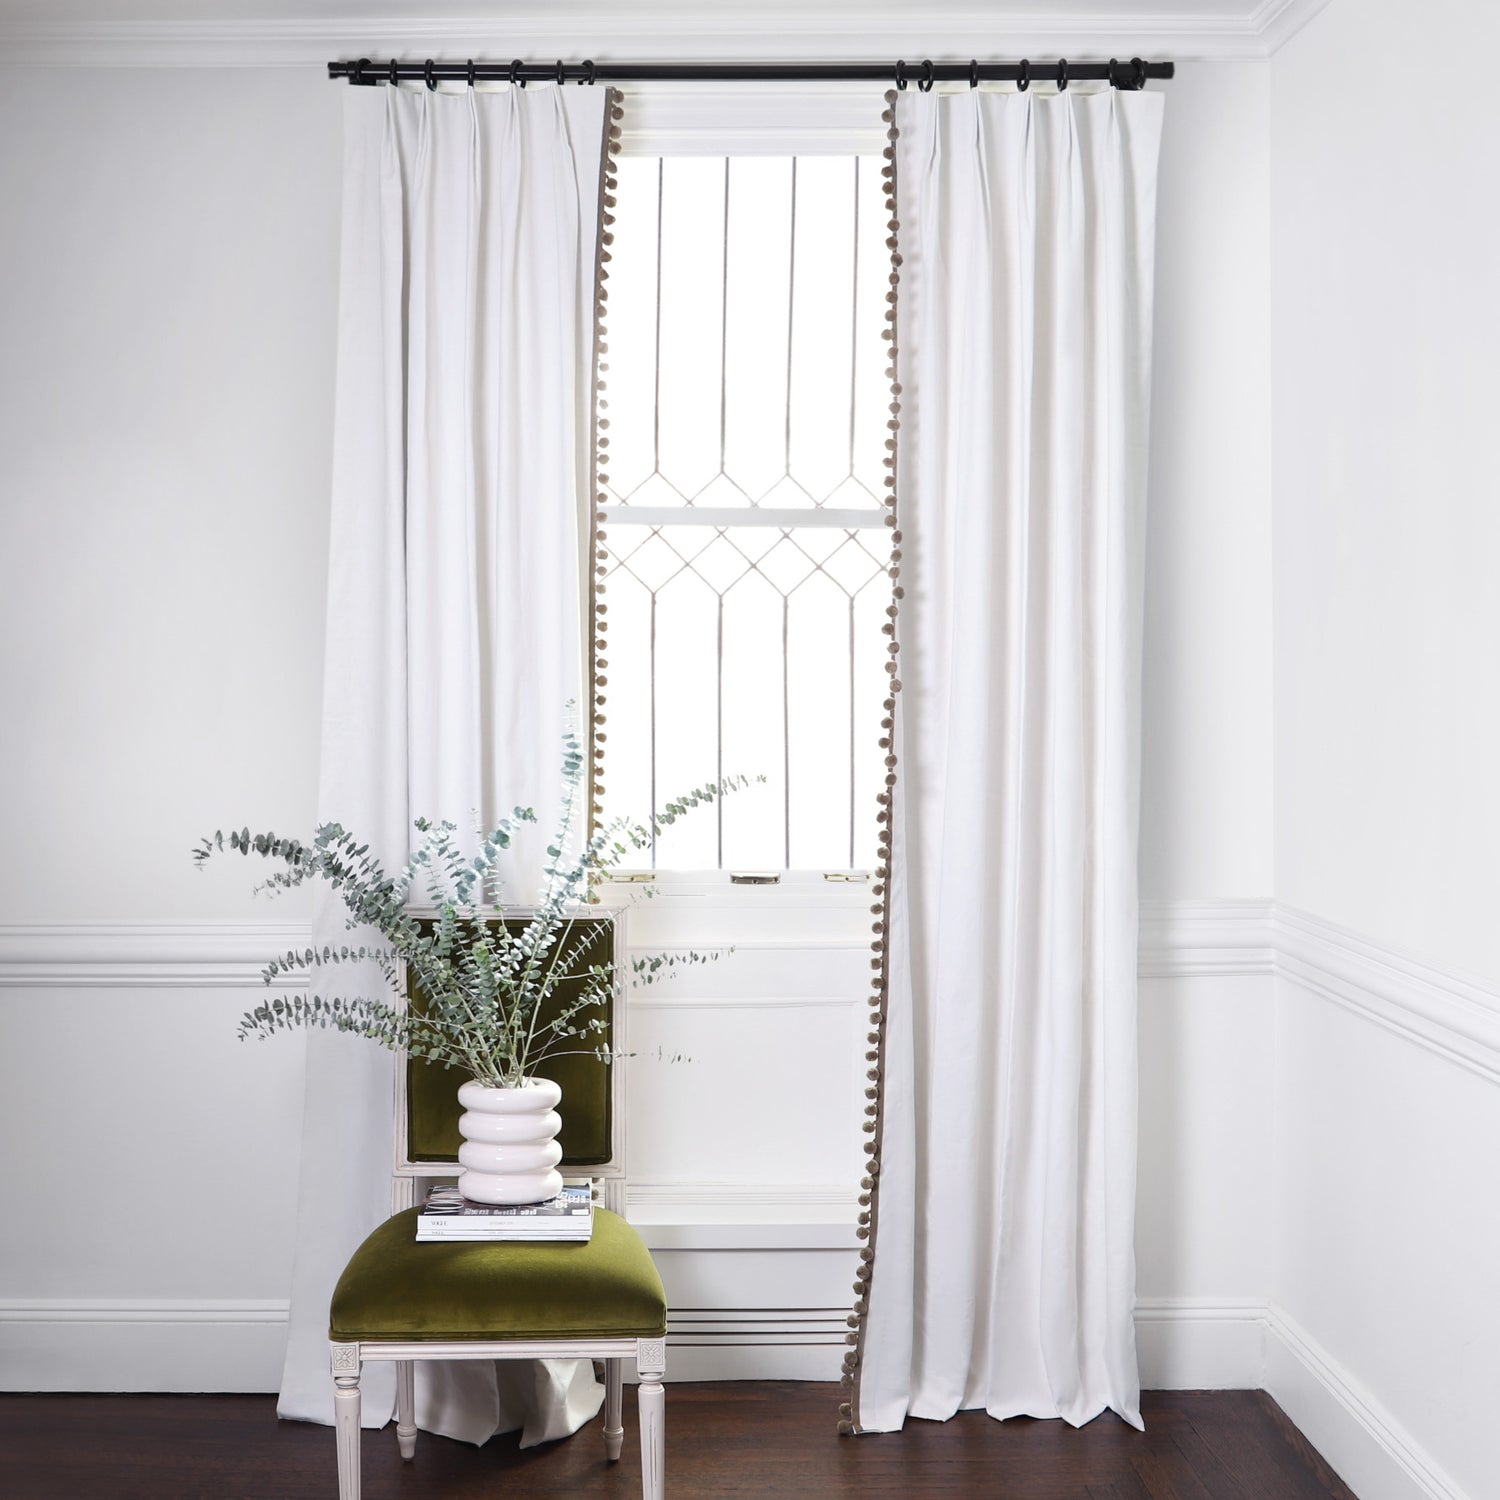 Custom White Curtains With Crosshatch Texture